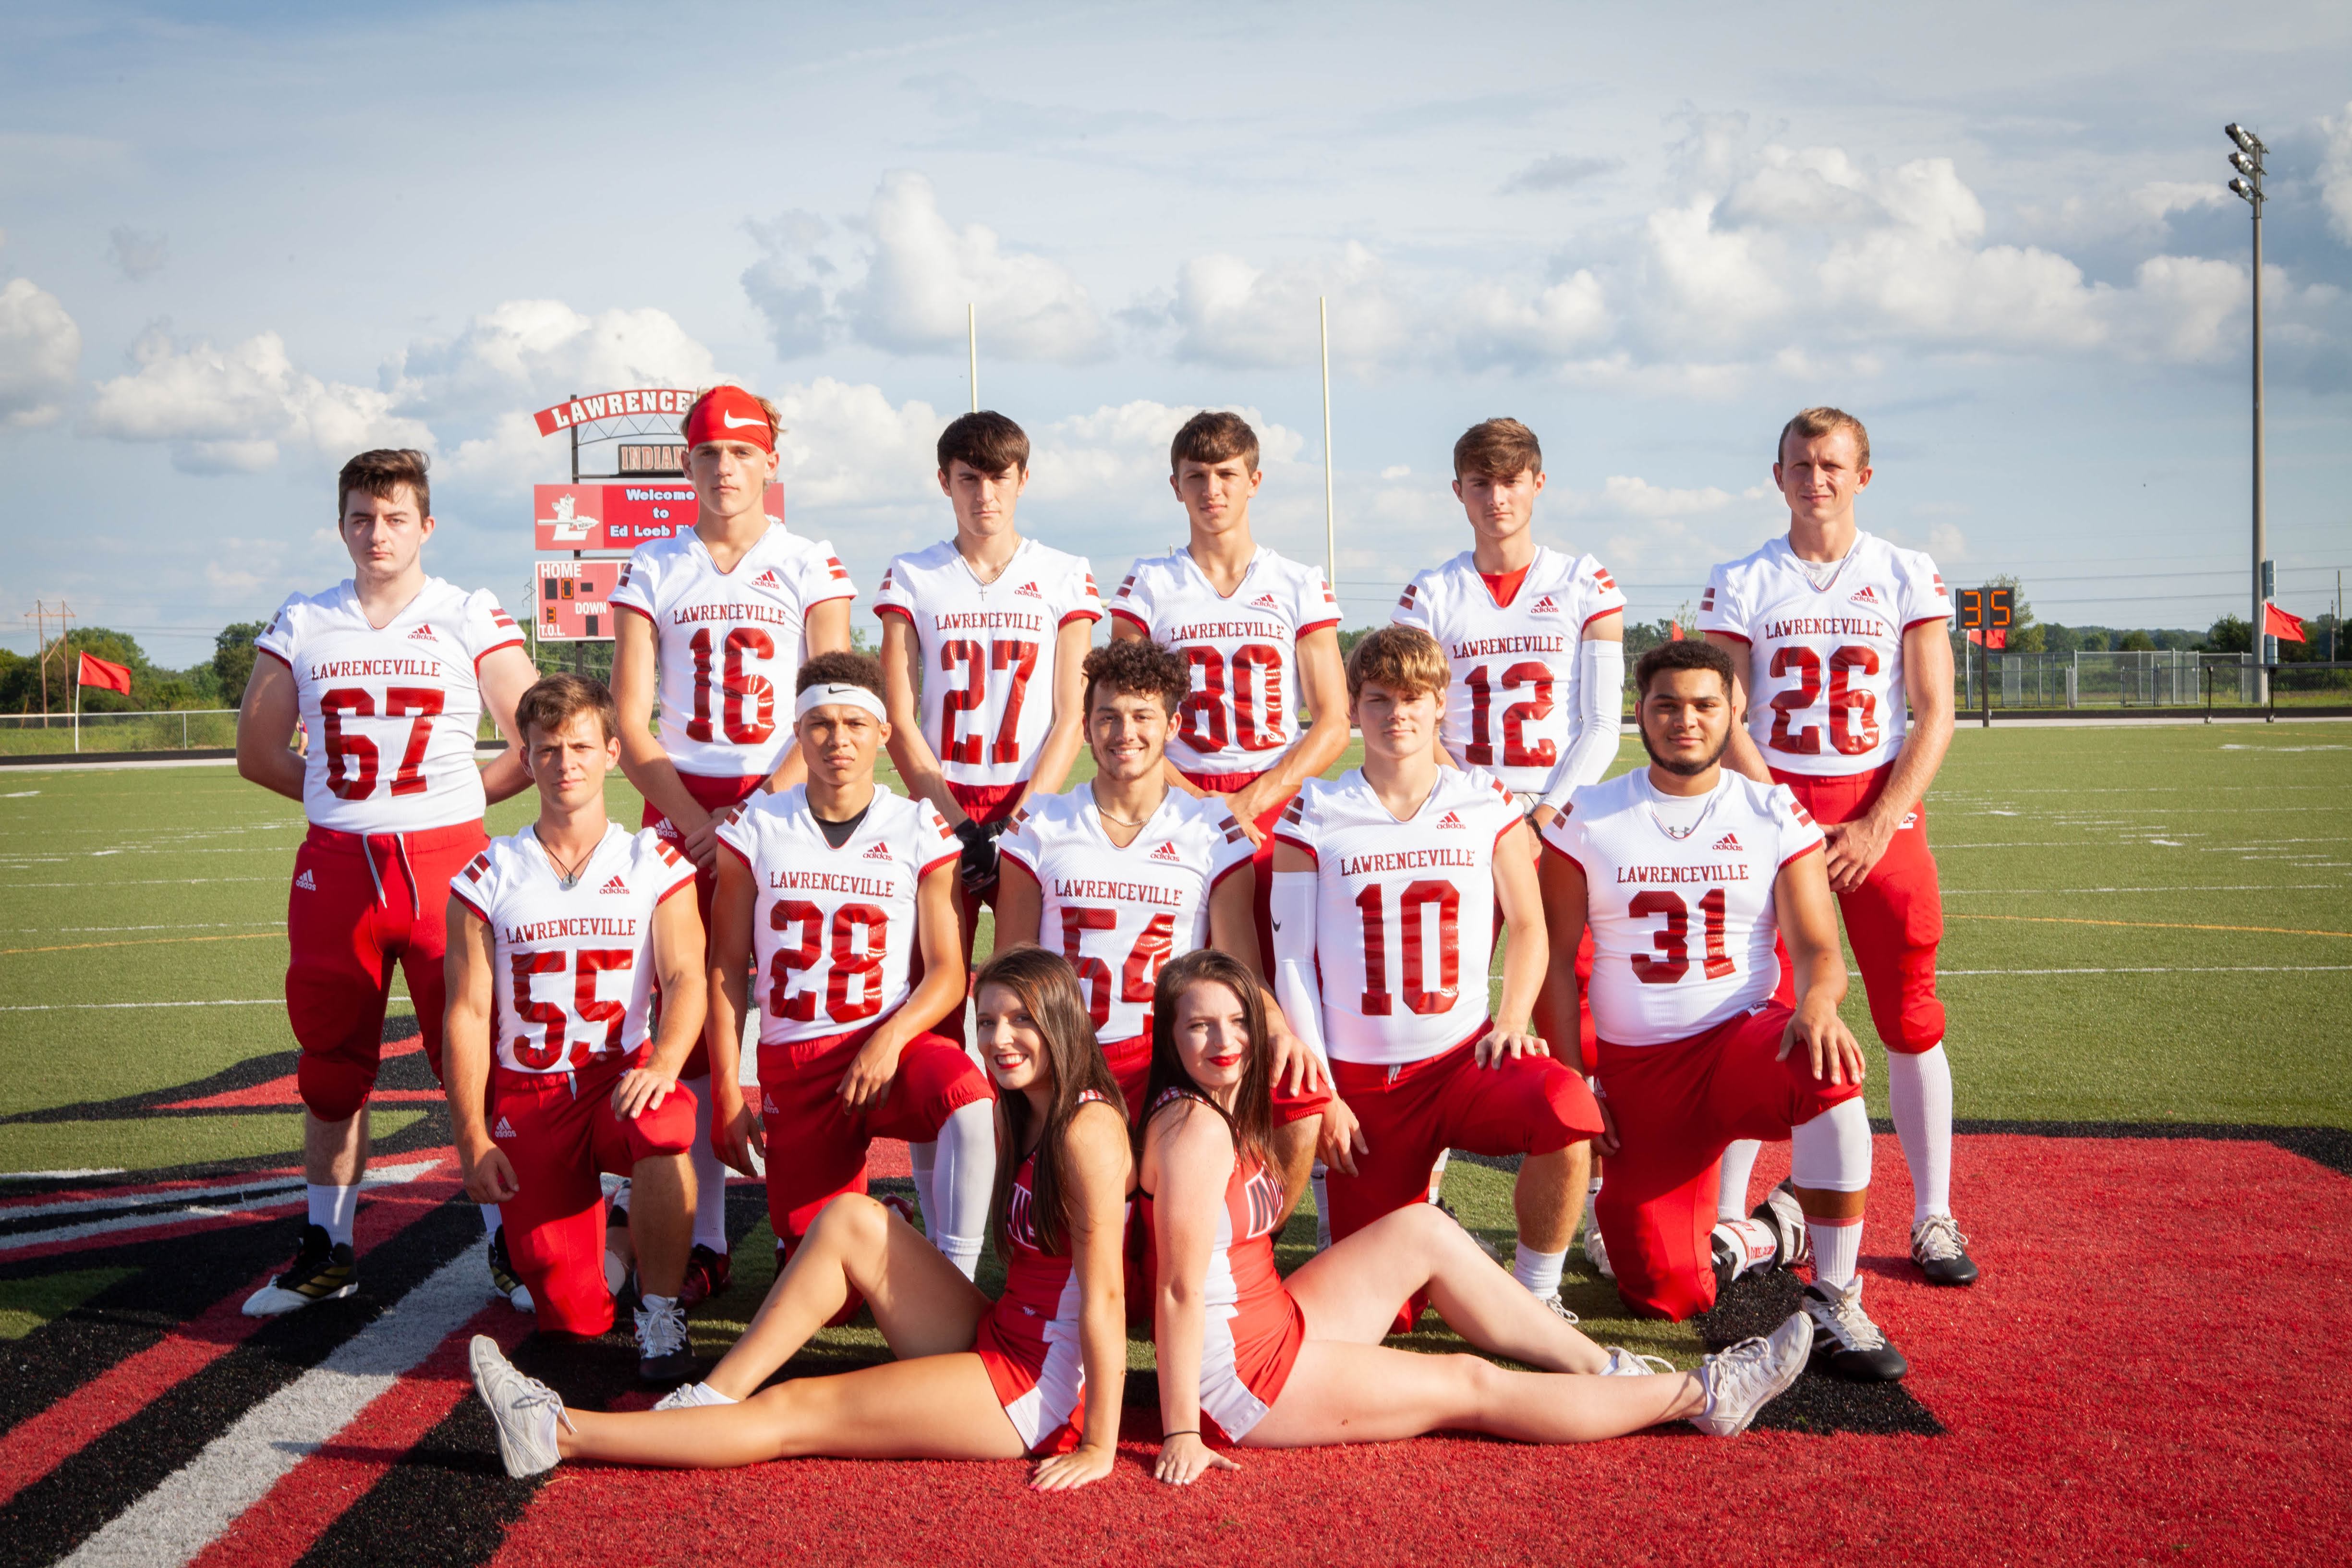 Top Row (L to R): Joey Lomalie, Blayne Winningham, Brandon Goble, Eli Ivers, Cale Powell, and Jordan Jones.  Middle Row (L to R): Chase Hooper, Lathan Chisolm, Dayman Parkman, Skyler Tewell, and Christion Beamon.  Bottom Row (L to R): Macy Bousley and Alexus Brown.